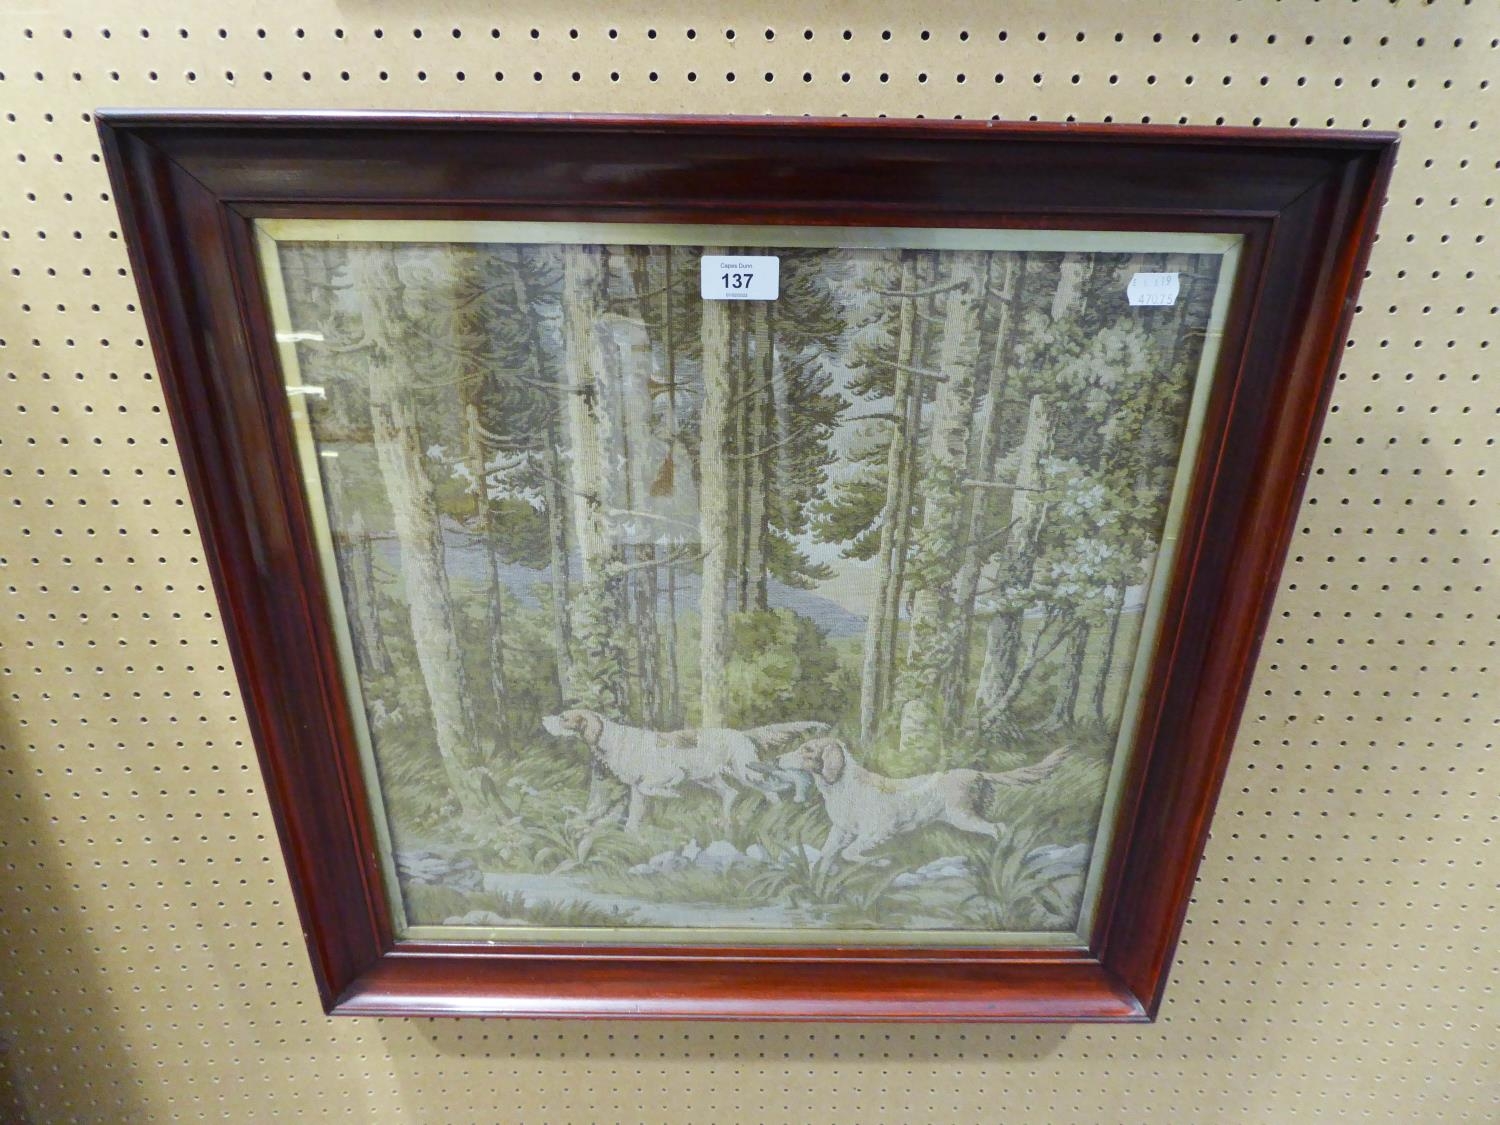 A MACHINE WOVEN TAPESTRY OF DOGS WALKING IN A WOODLAND NEAR A STREAM